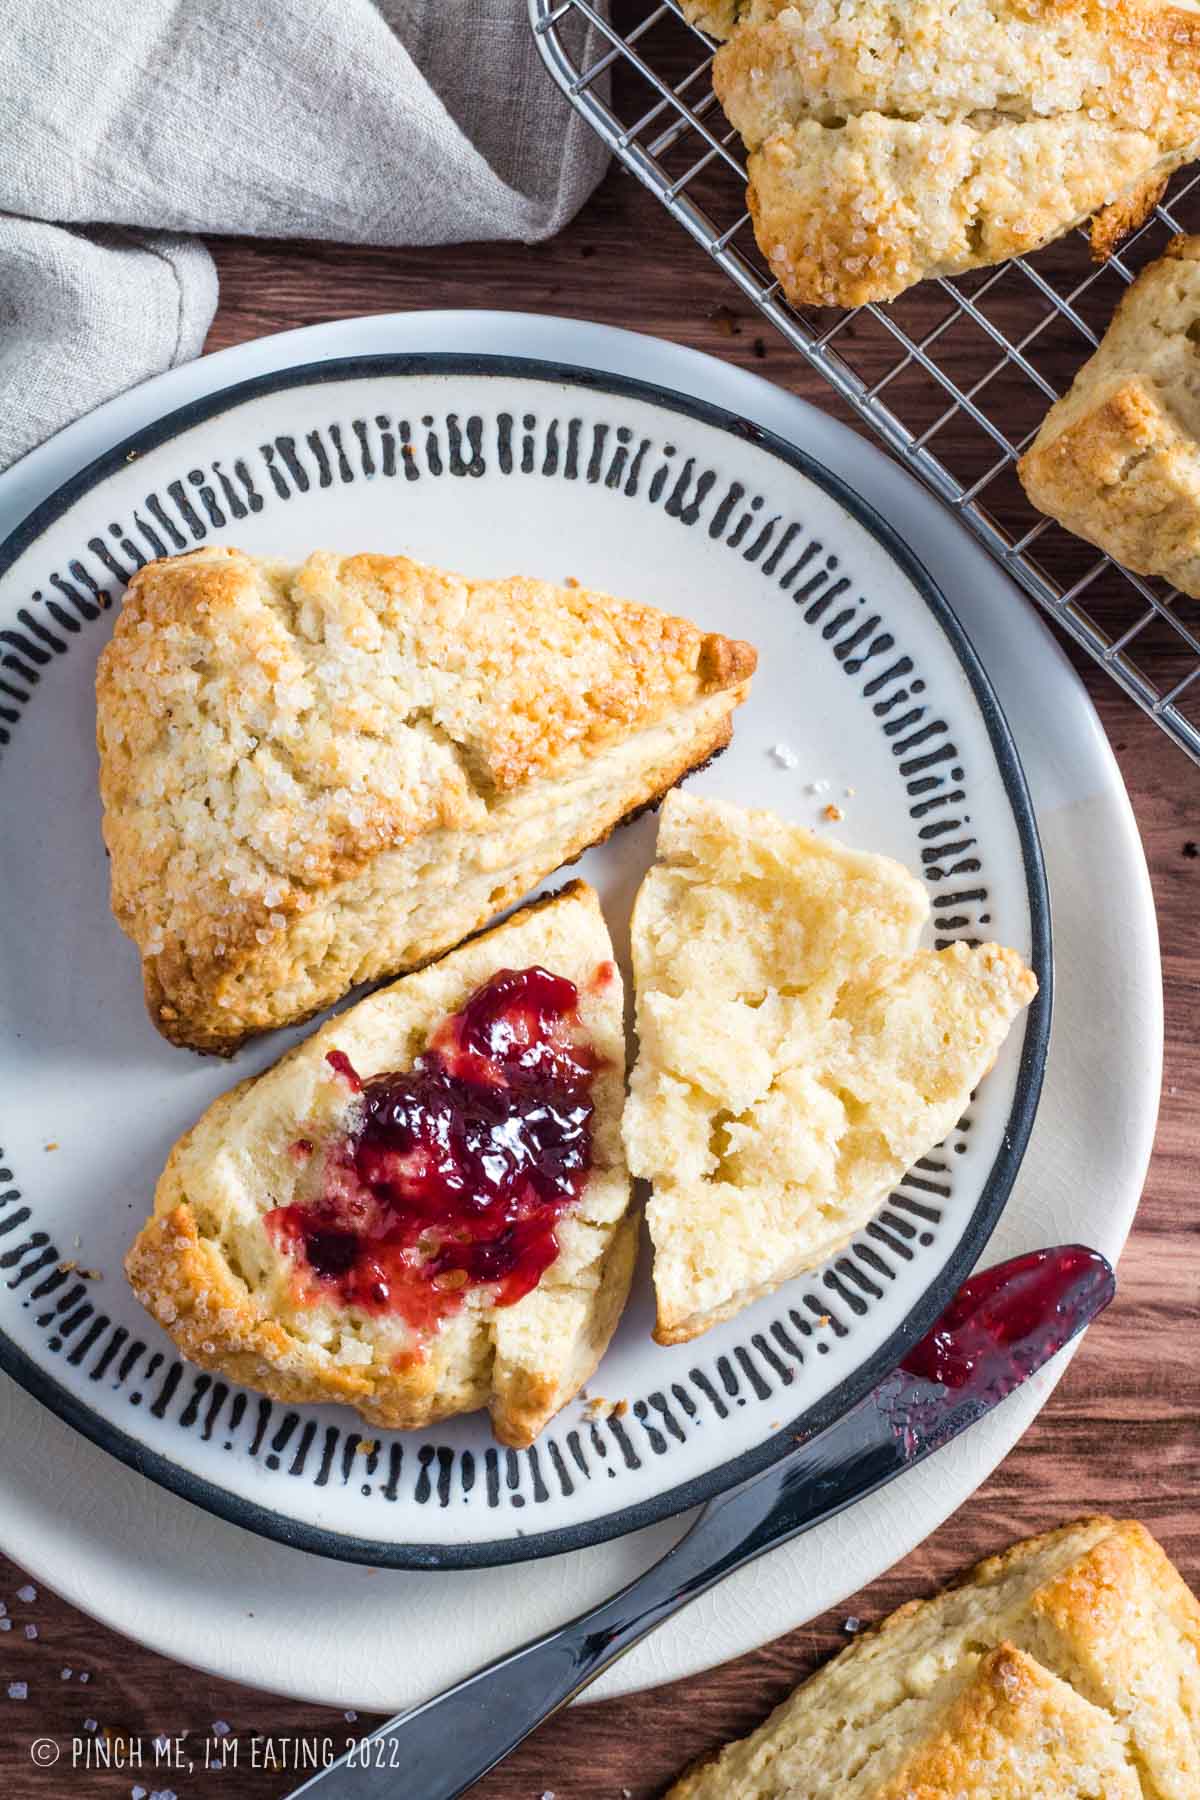 Raspberry jam on a basic scone on a white plate.